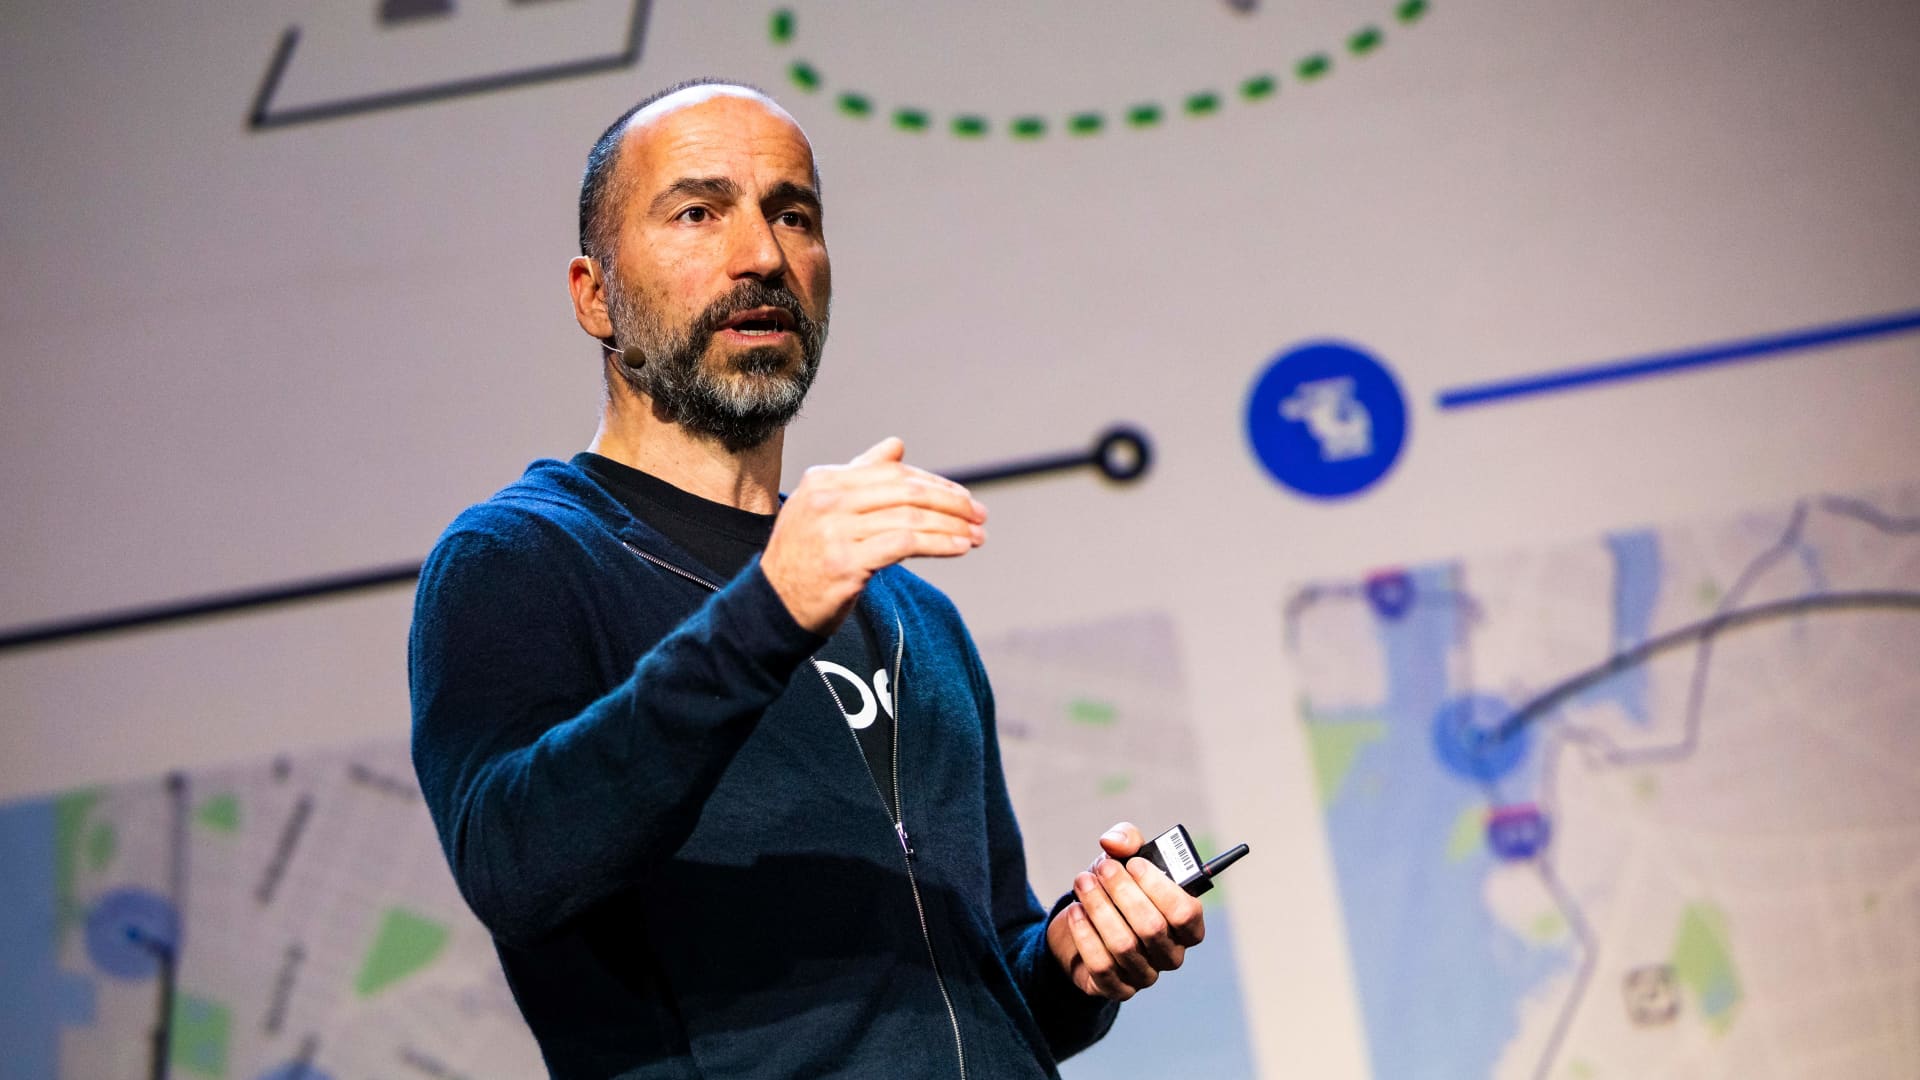 Uber CEO almost said no to the job—Spotify CEO convinced him to take it